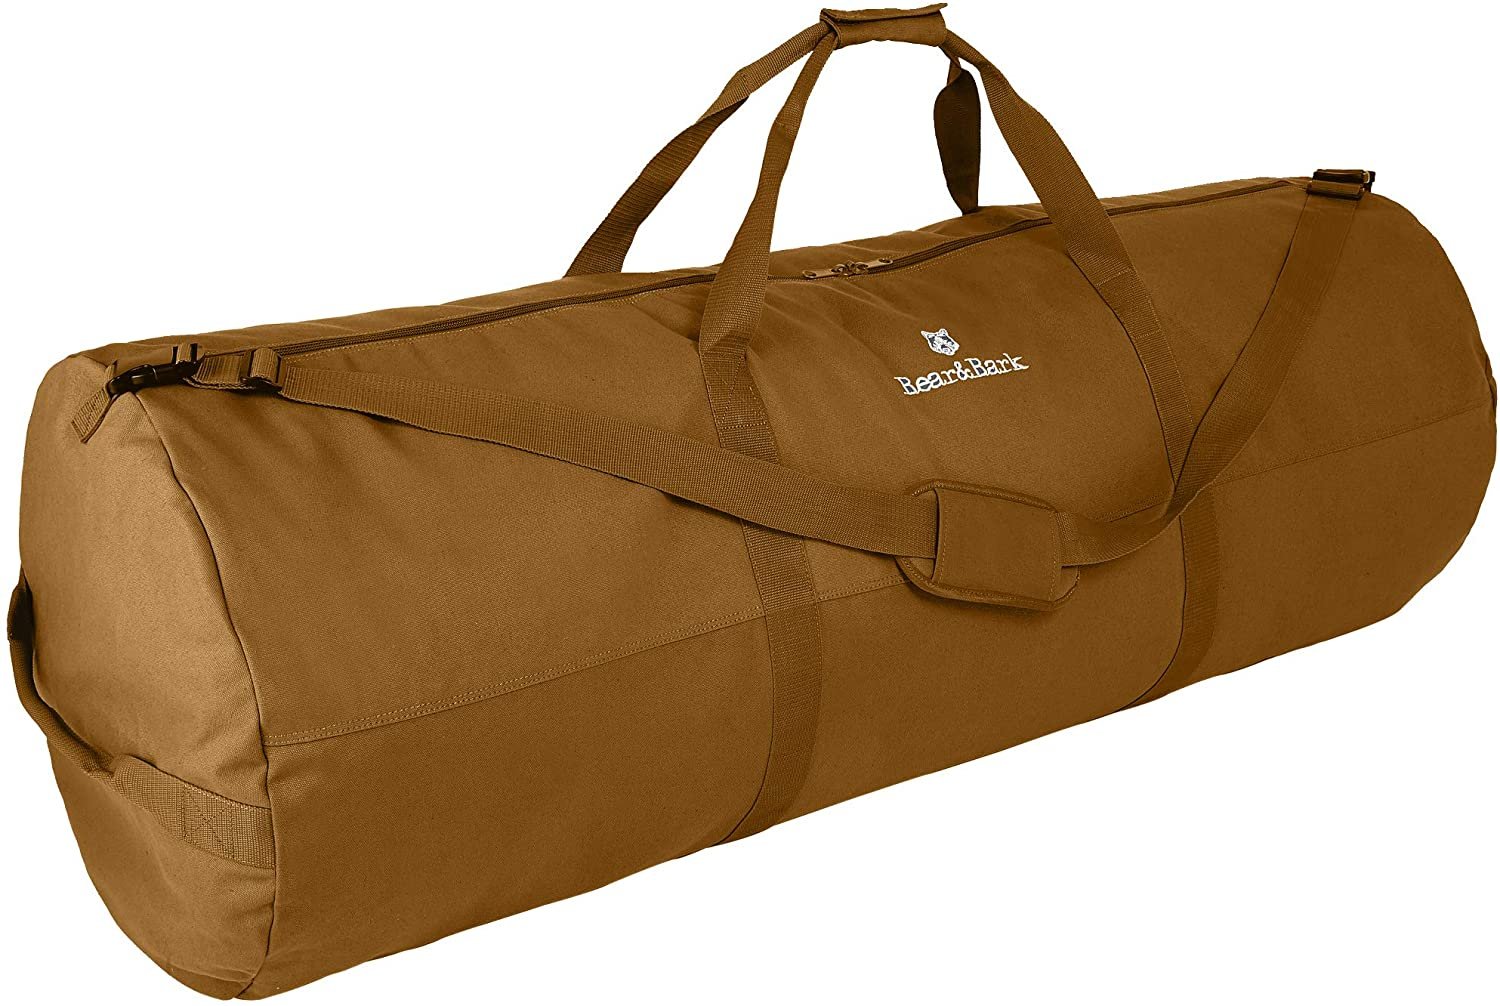 Large Black Military Canvas Duffel Bag - 38x20 - Army Cargo Style Carryall for Men & Women - Free Shipping